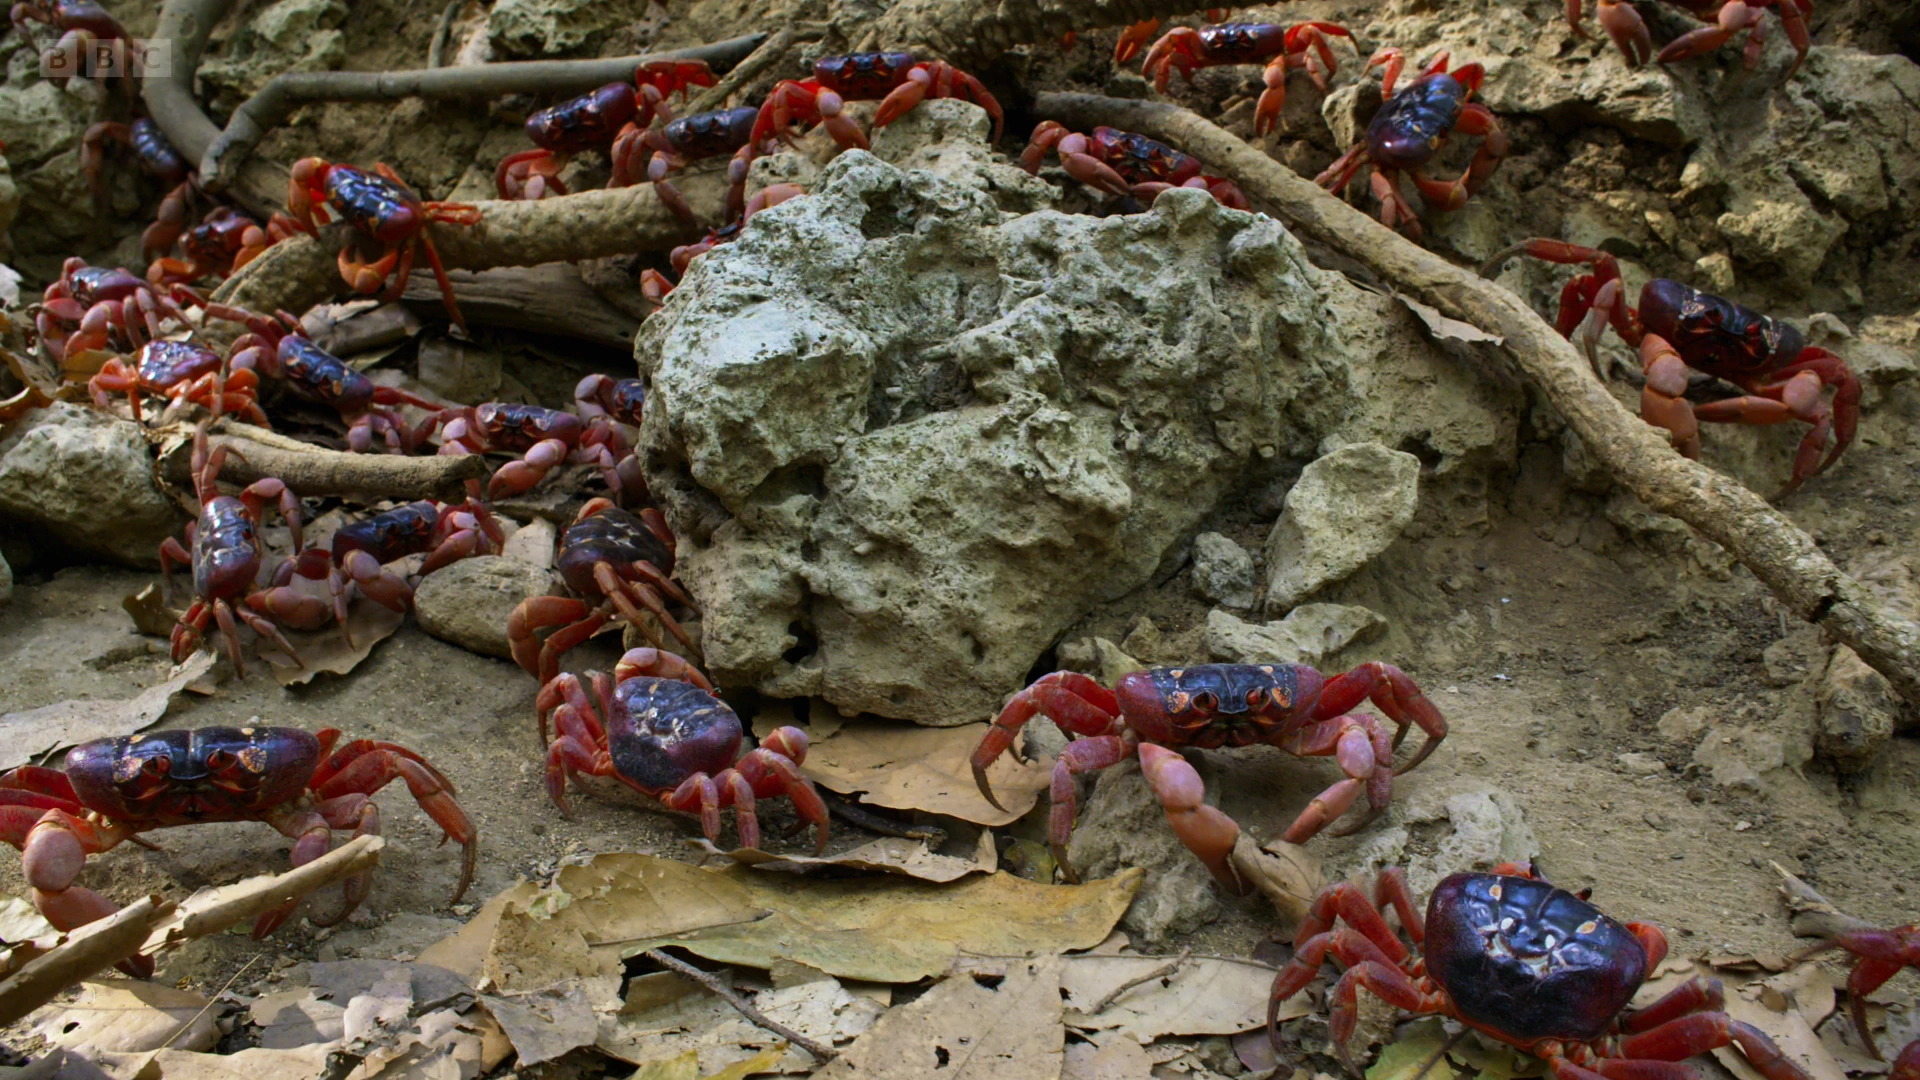 Christmas Island red crab (Gecarcoidea natalis) as shown in A Perfect Planet - Weather